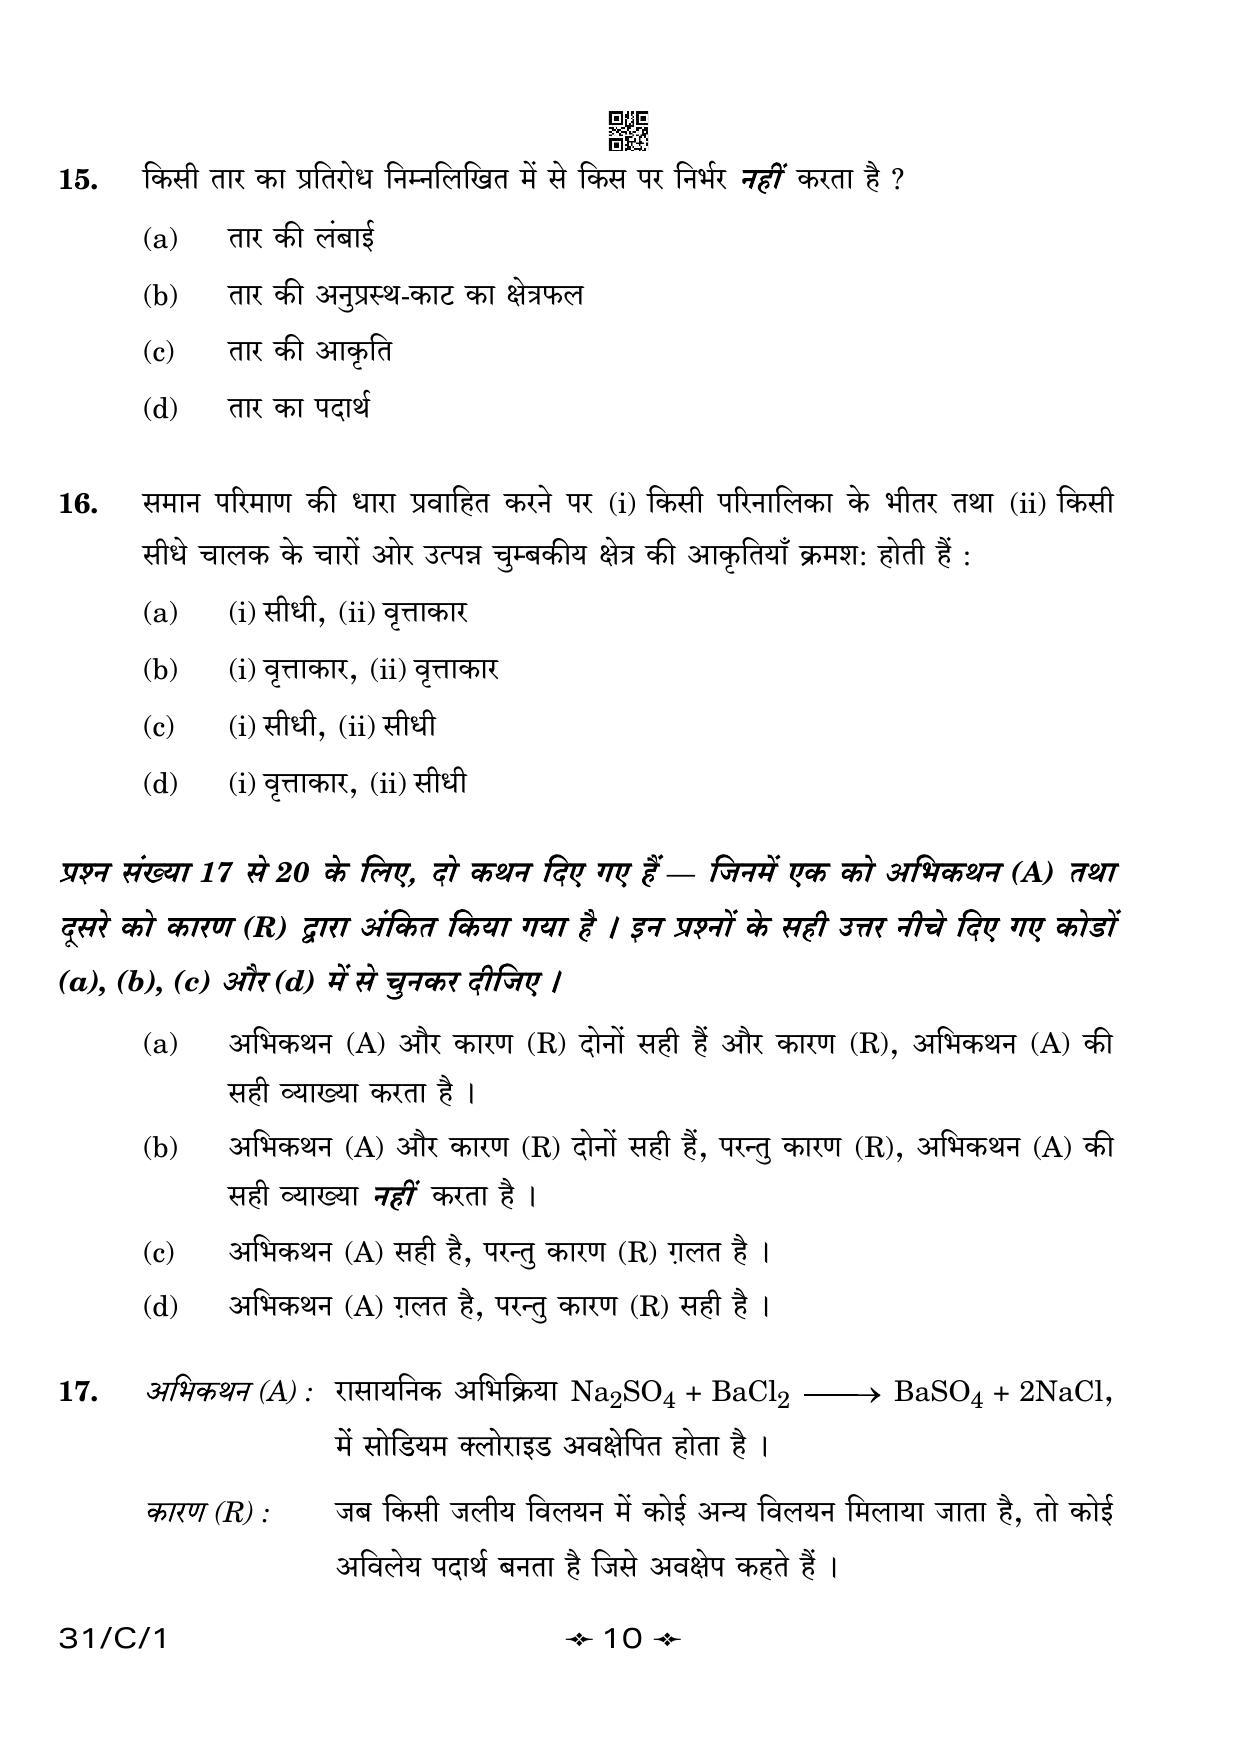 CBSE Class 10 31-1 Science 2023 (Compartment) Question Paper - Page 10